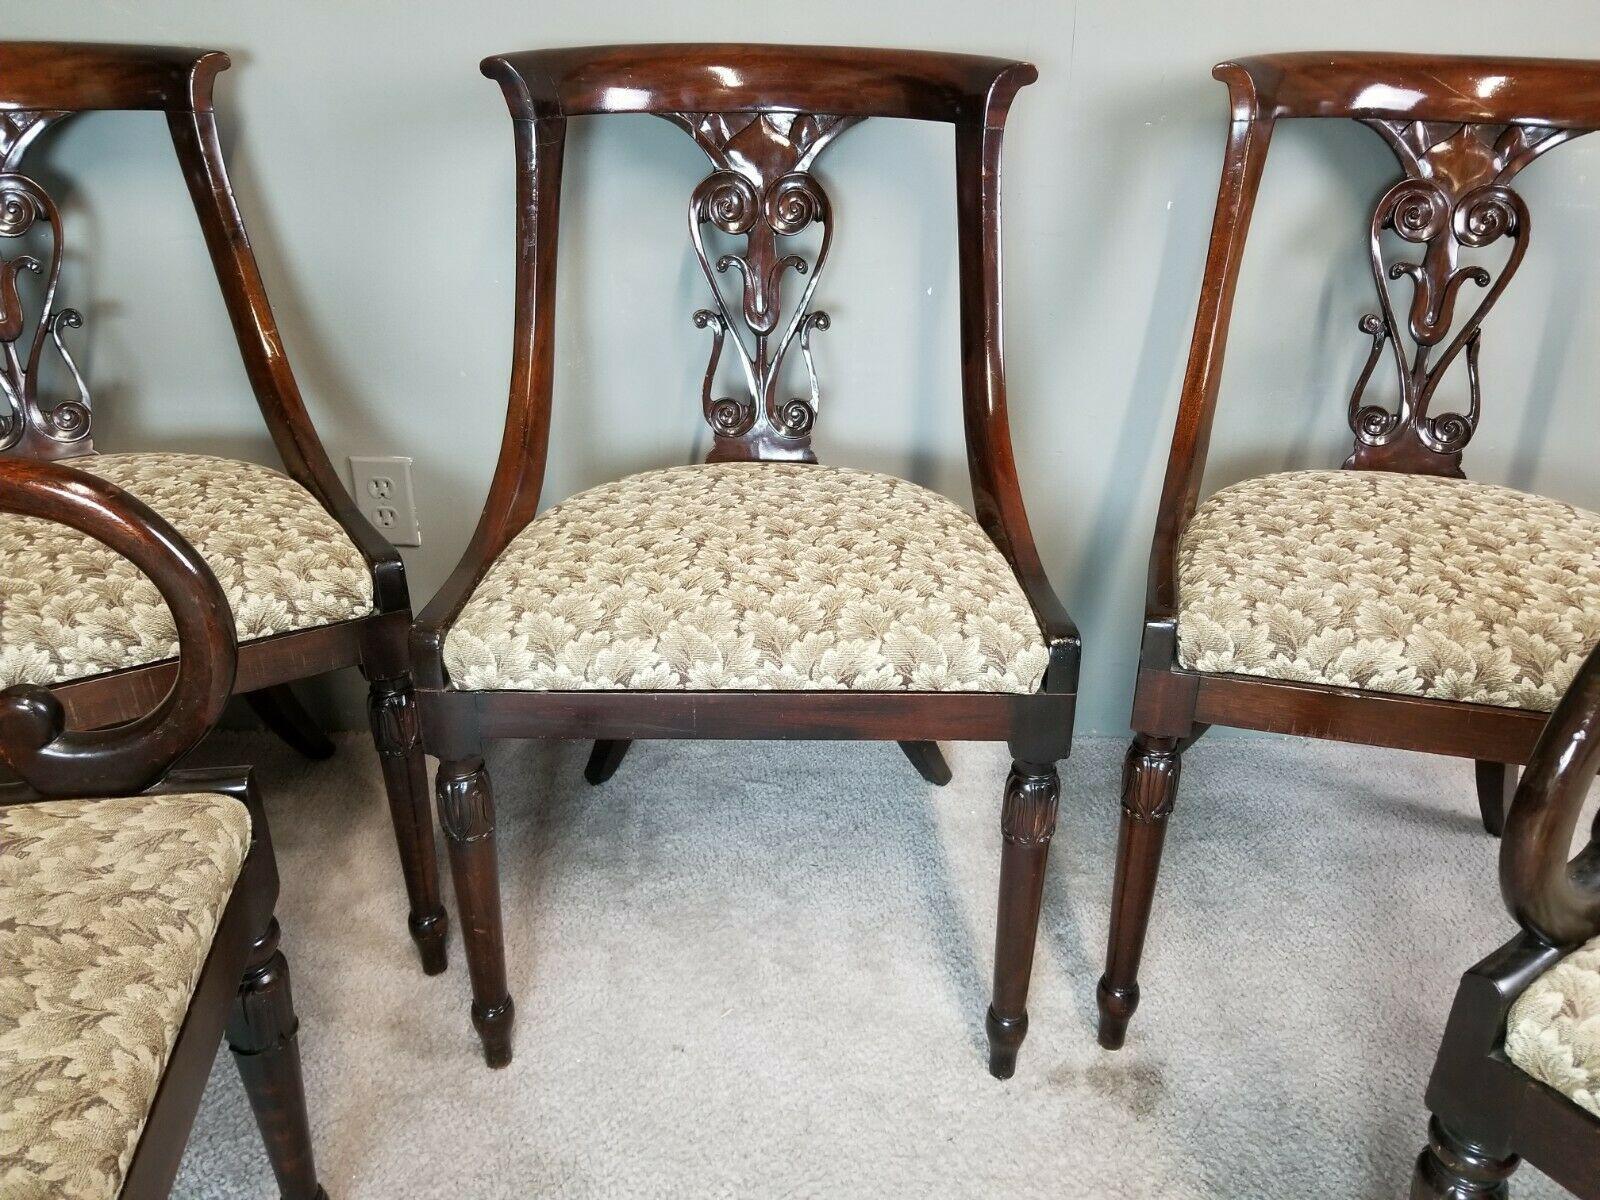 Antique English Regency Solid Mahogany Scroll Arm Dining Chairs, Set of 5 In Good Condition For Sale In Lake Worth, FL